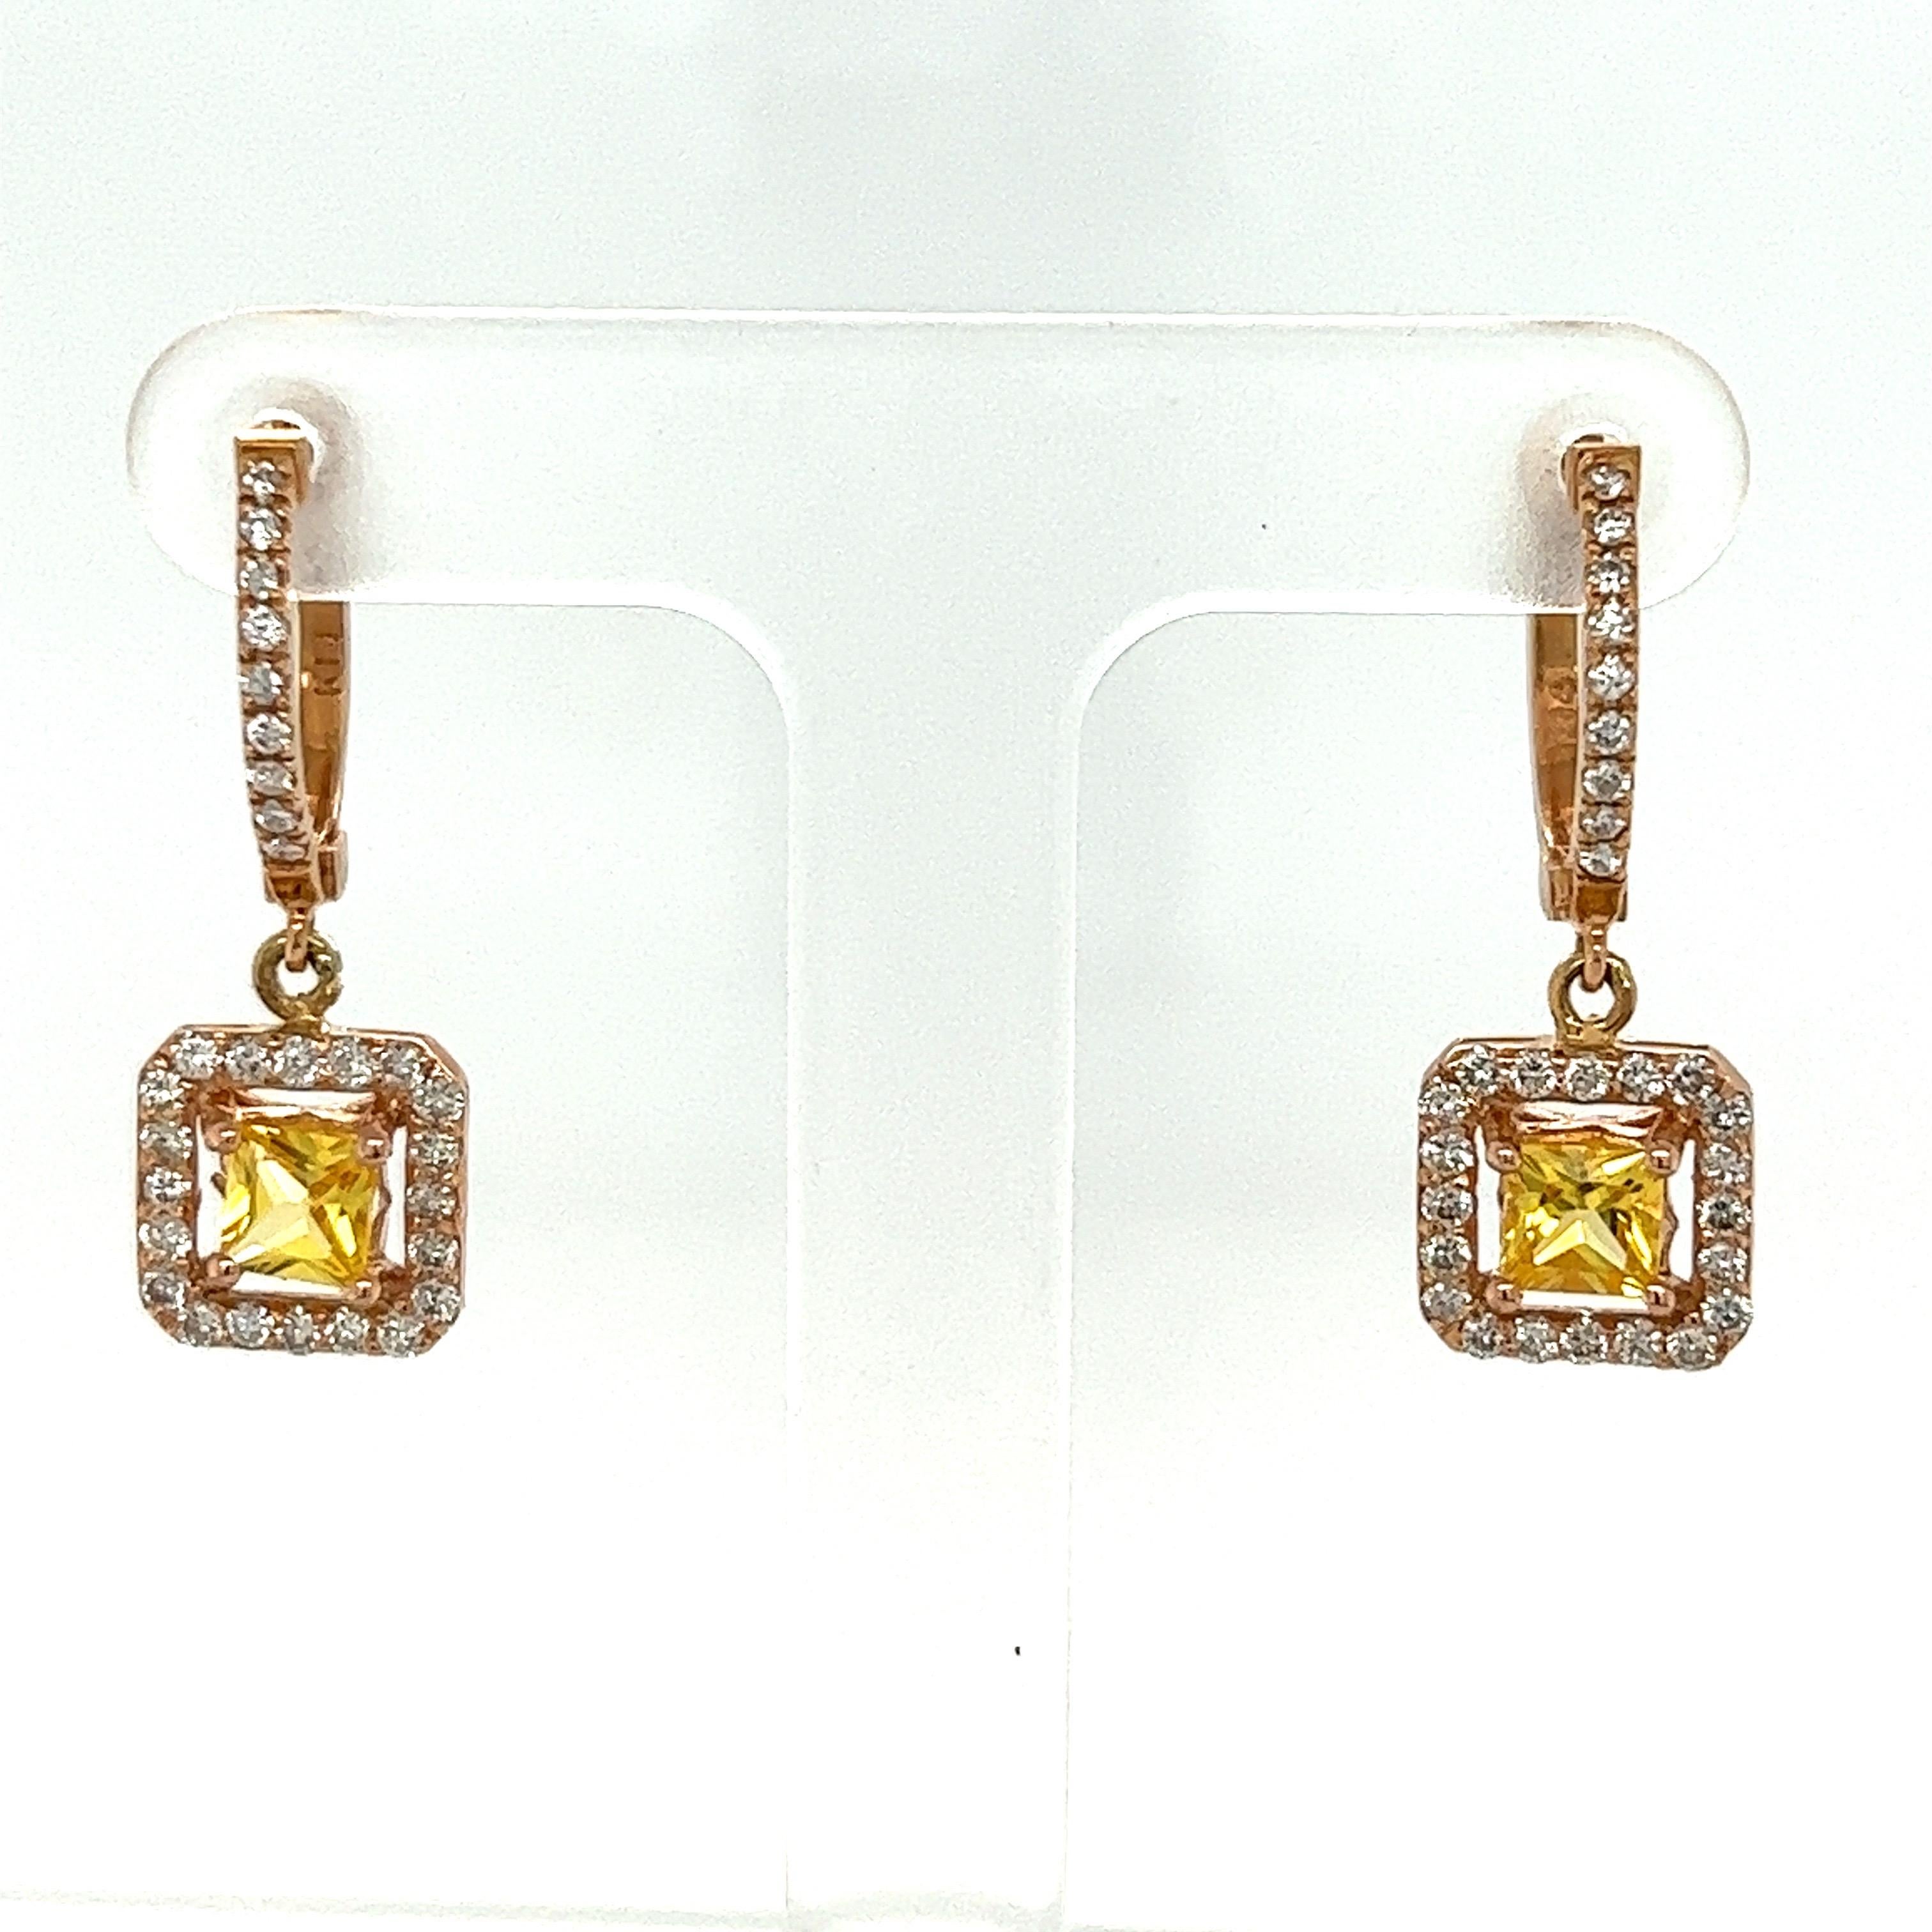 These earrings have Square Cut Yellow Sapphires that weigh 1.11 carats and measure at approximately 4 mm x 4 mm. There are Round Cut Diamonds that weigh 0.60 carats. The total carat weight of the earrings are 1.71 carats. The diamond clarity and